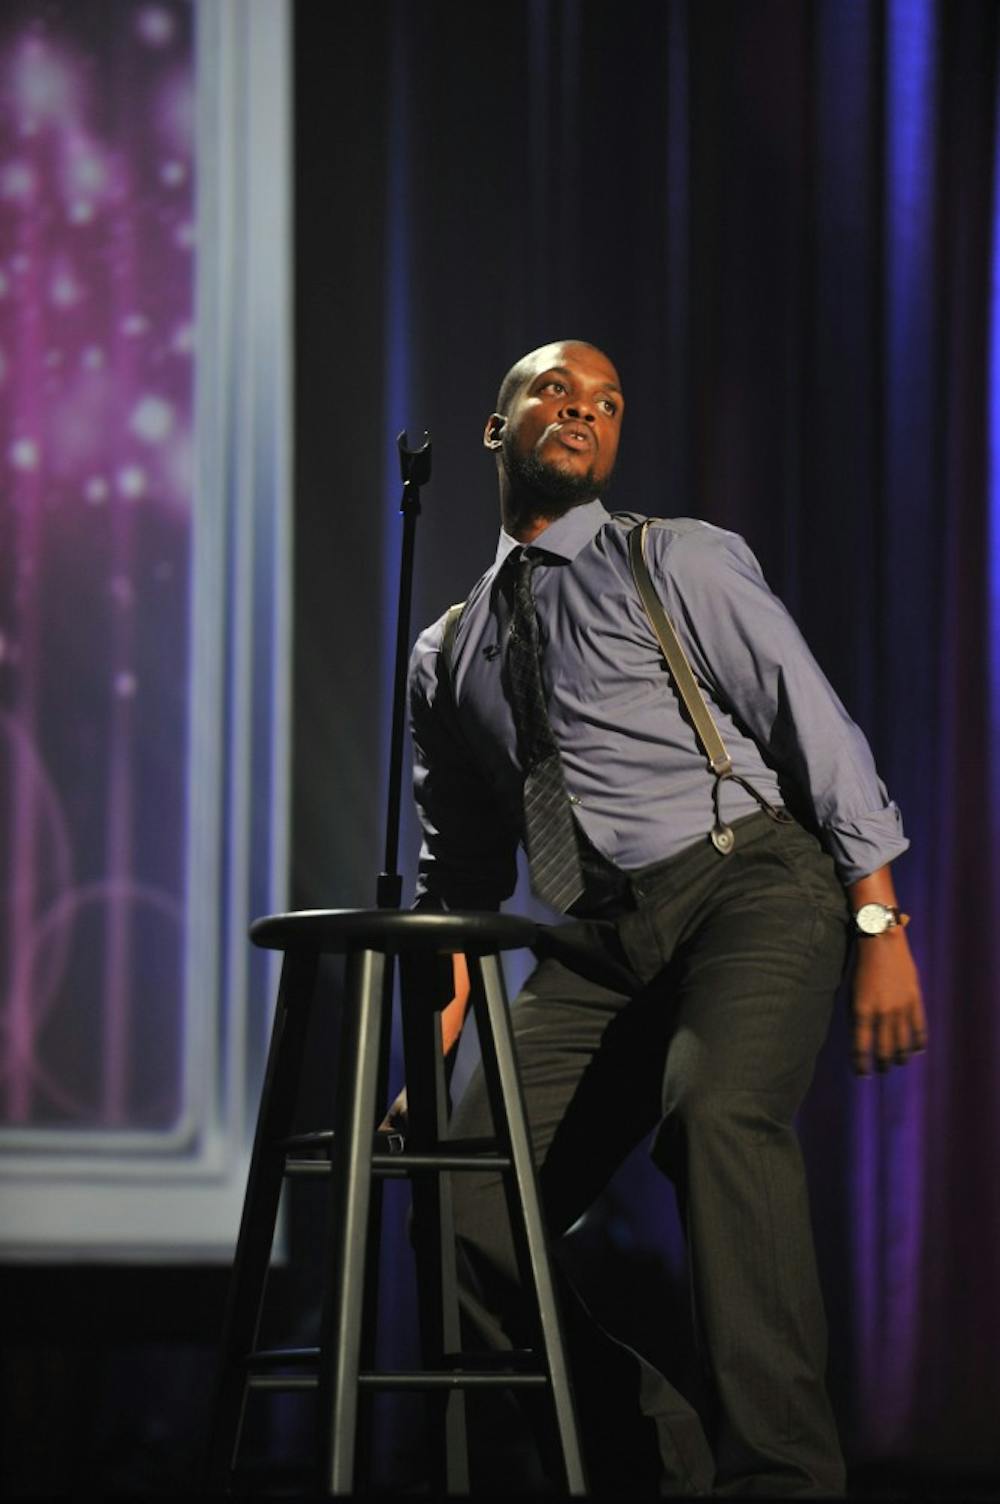 Siddiq has two more shows in Madison&nbsp;tonight at&nbsp;8:30 p.m and 10:30 p.m.